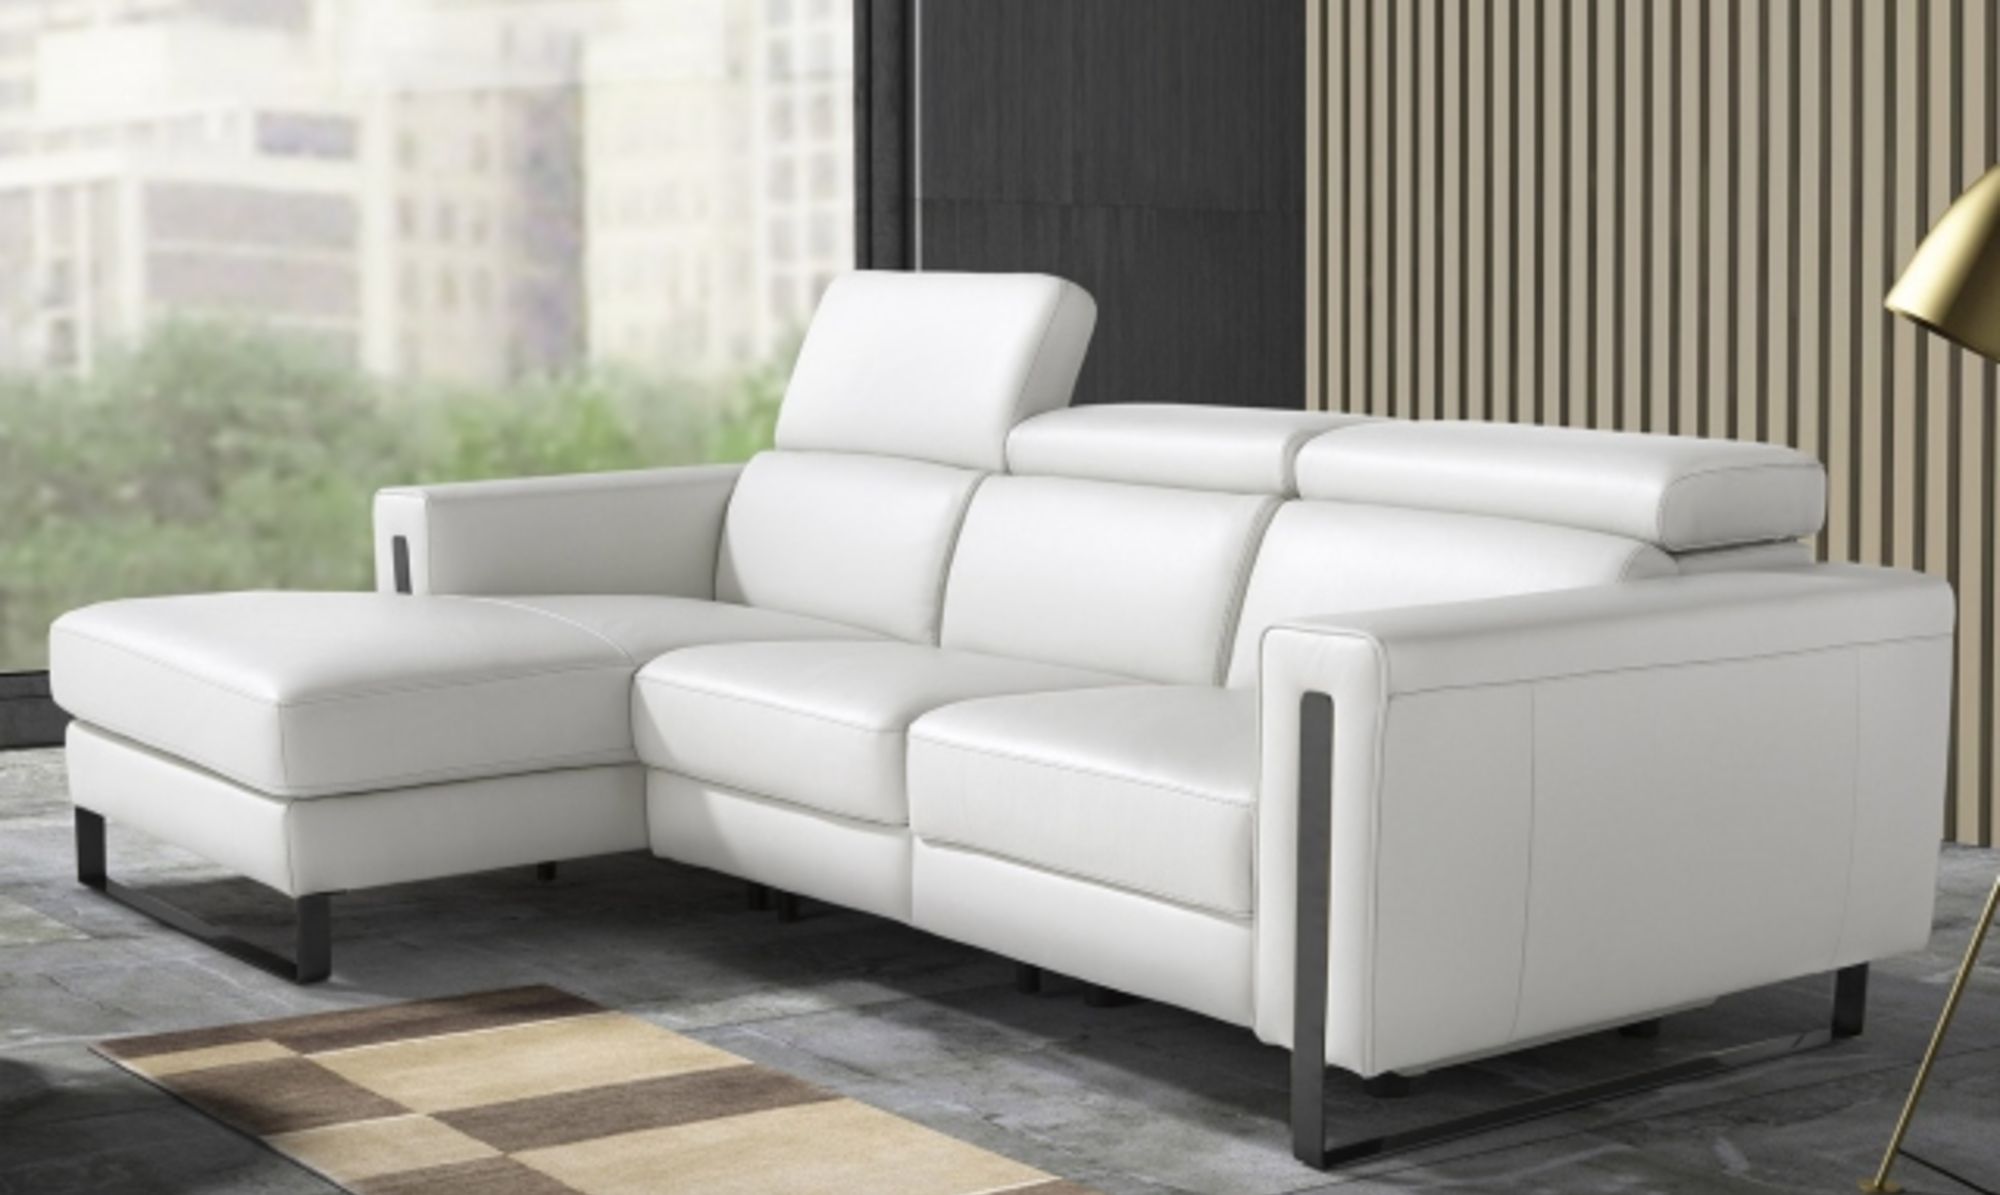 White Leather Sofa Fishpools Lifestyle, Contemporary White Leather Couch